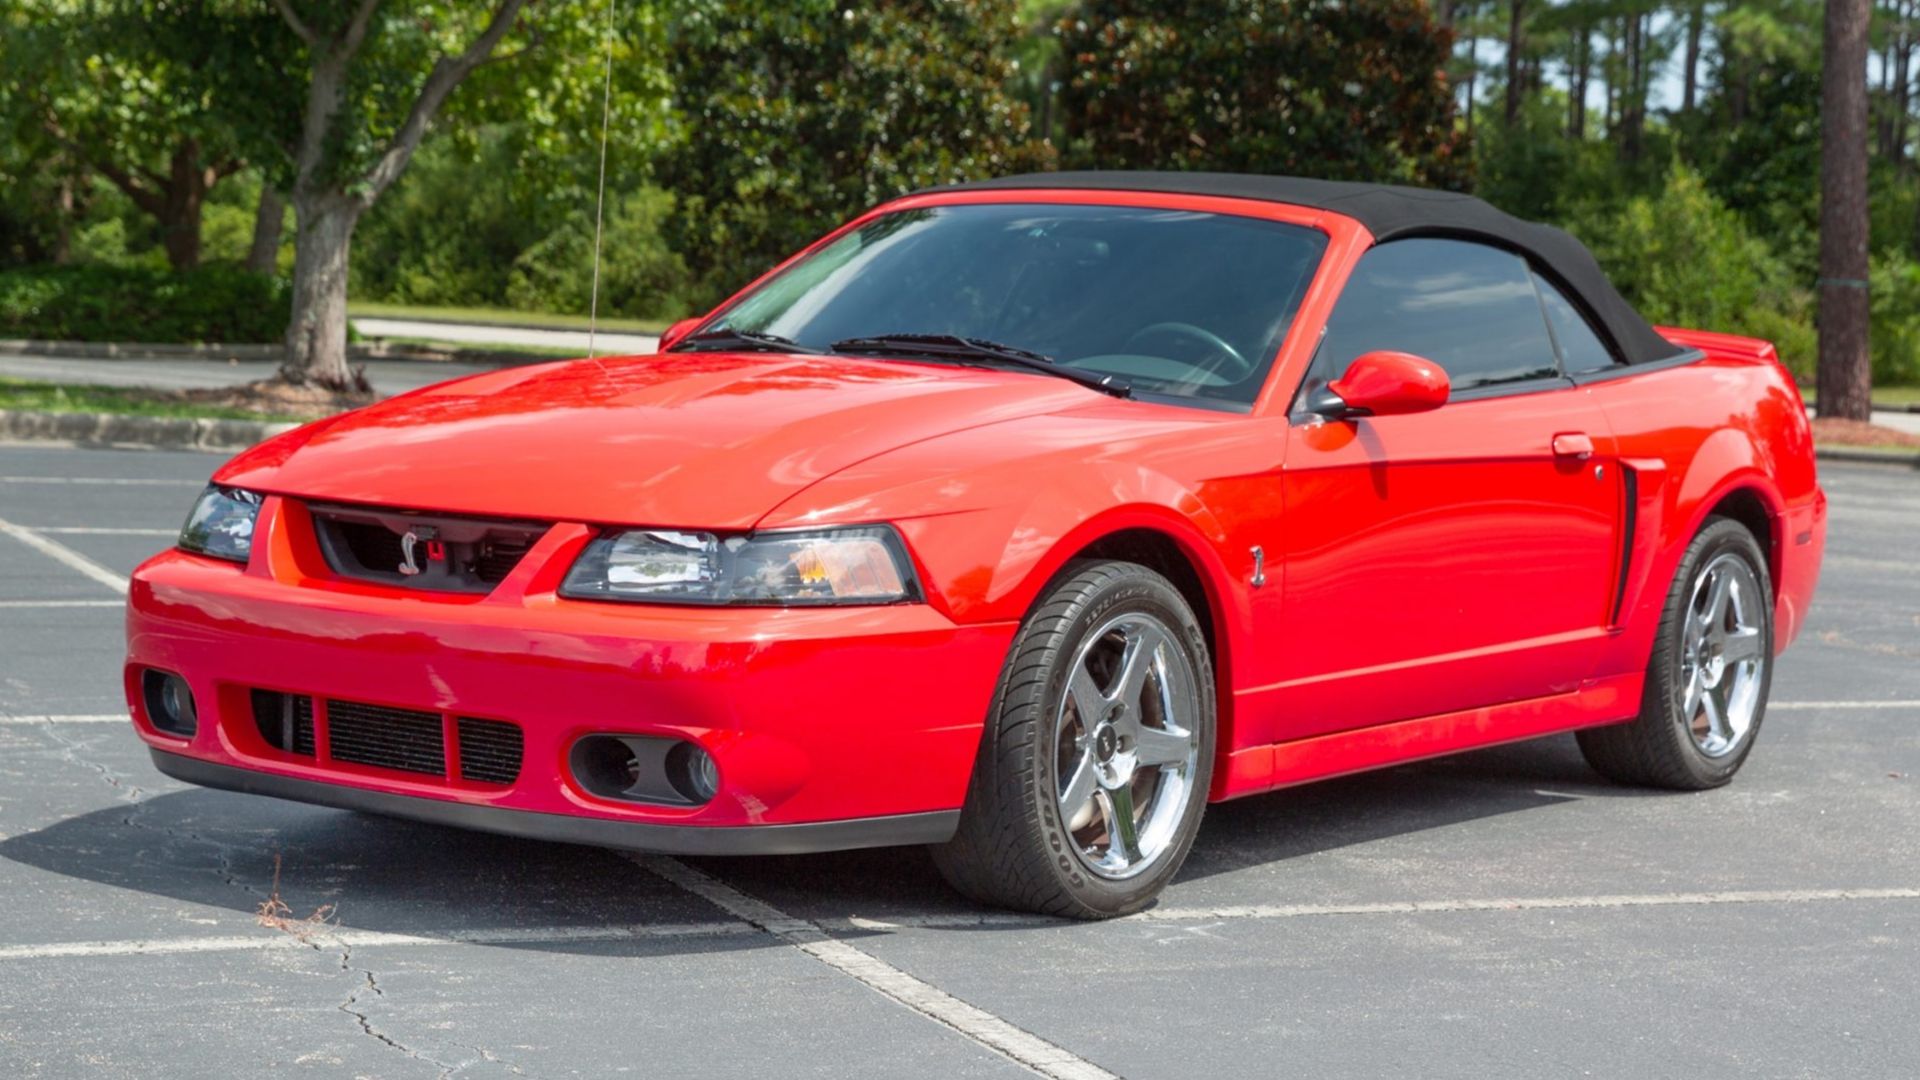 2004 Ford Mustang Cobra SVT in red posing in parking lot